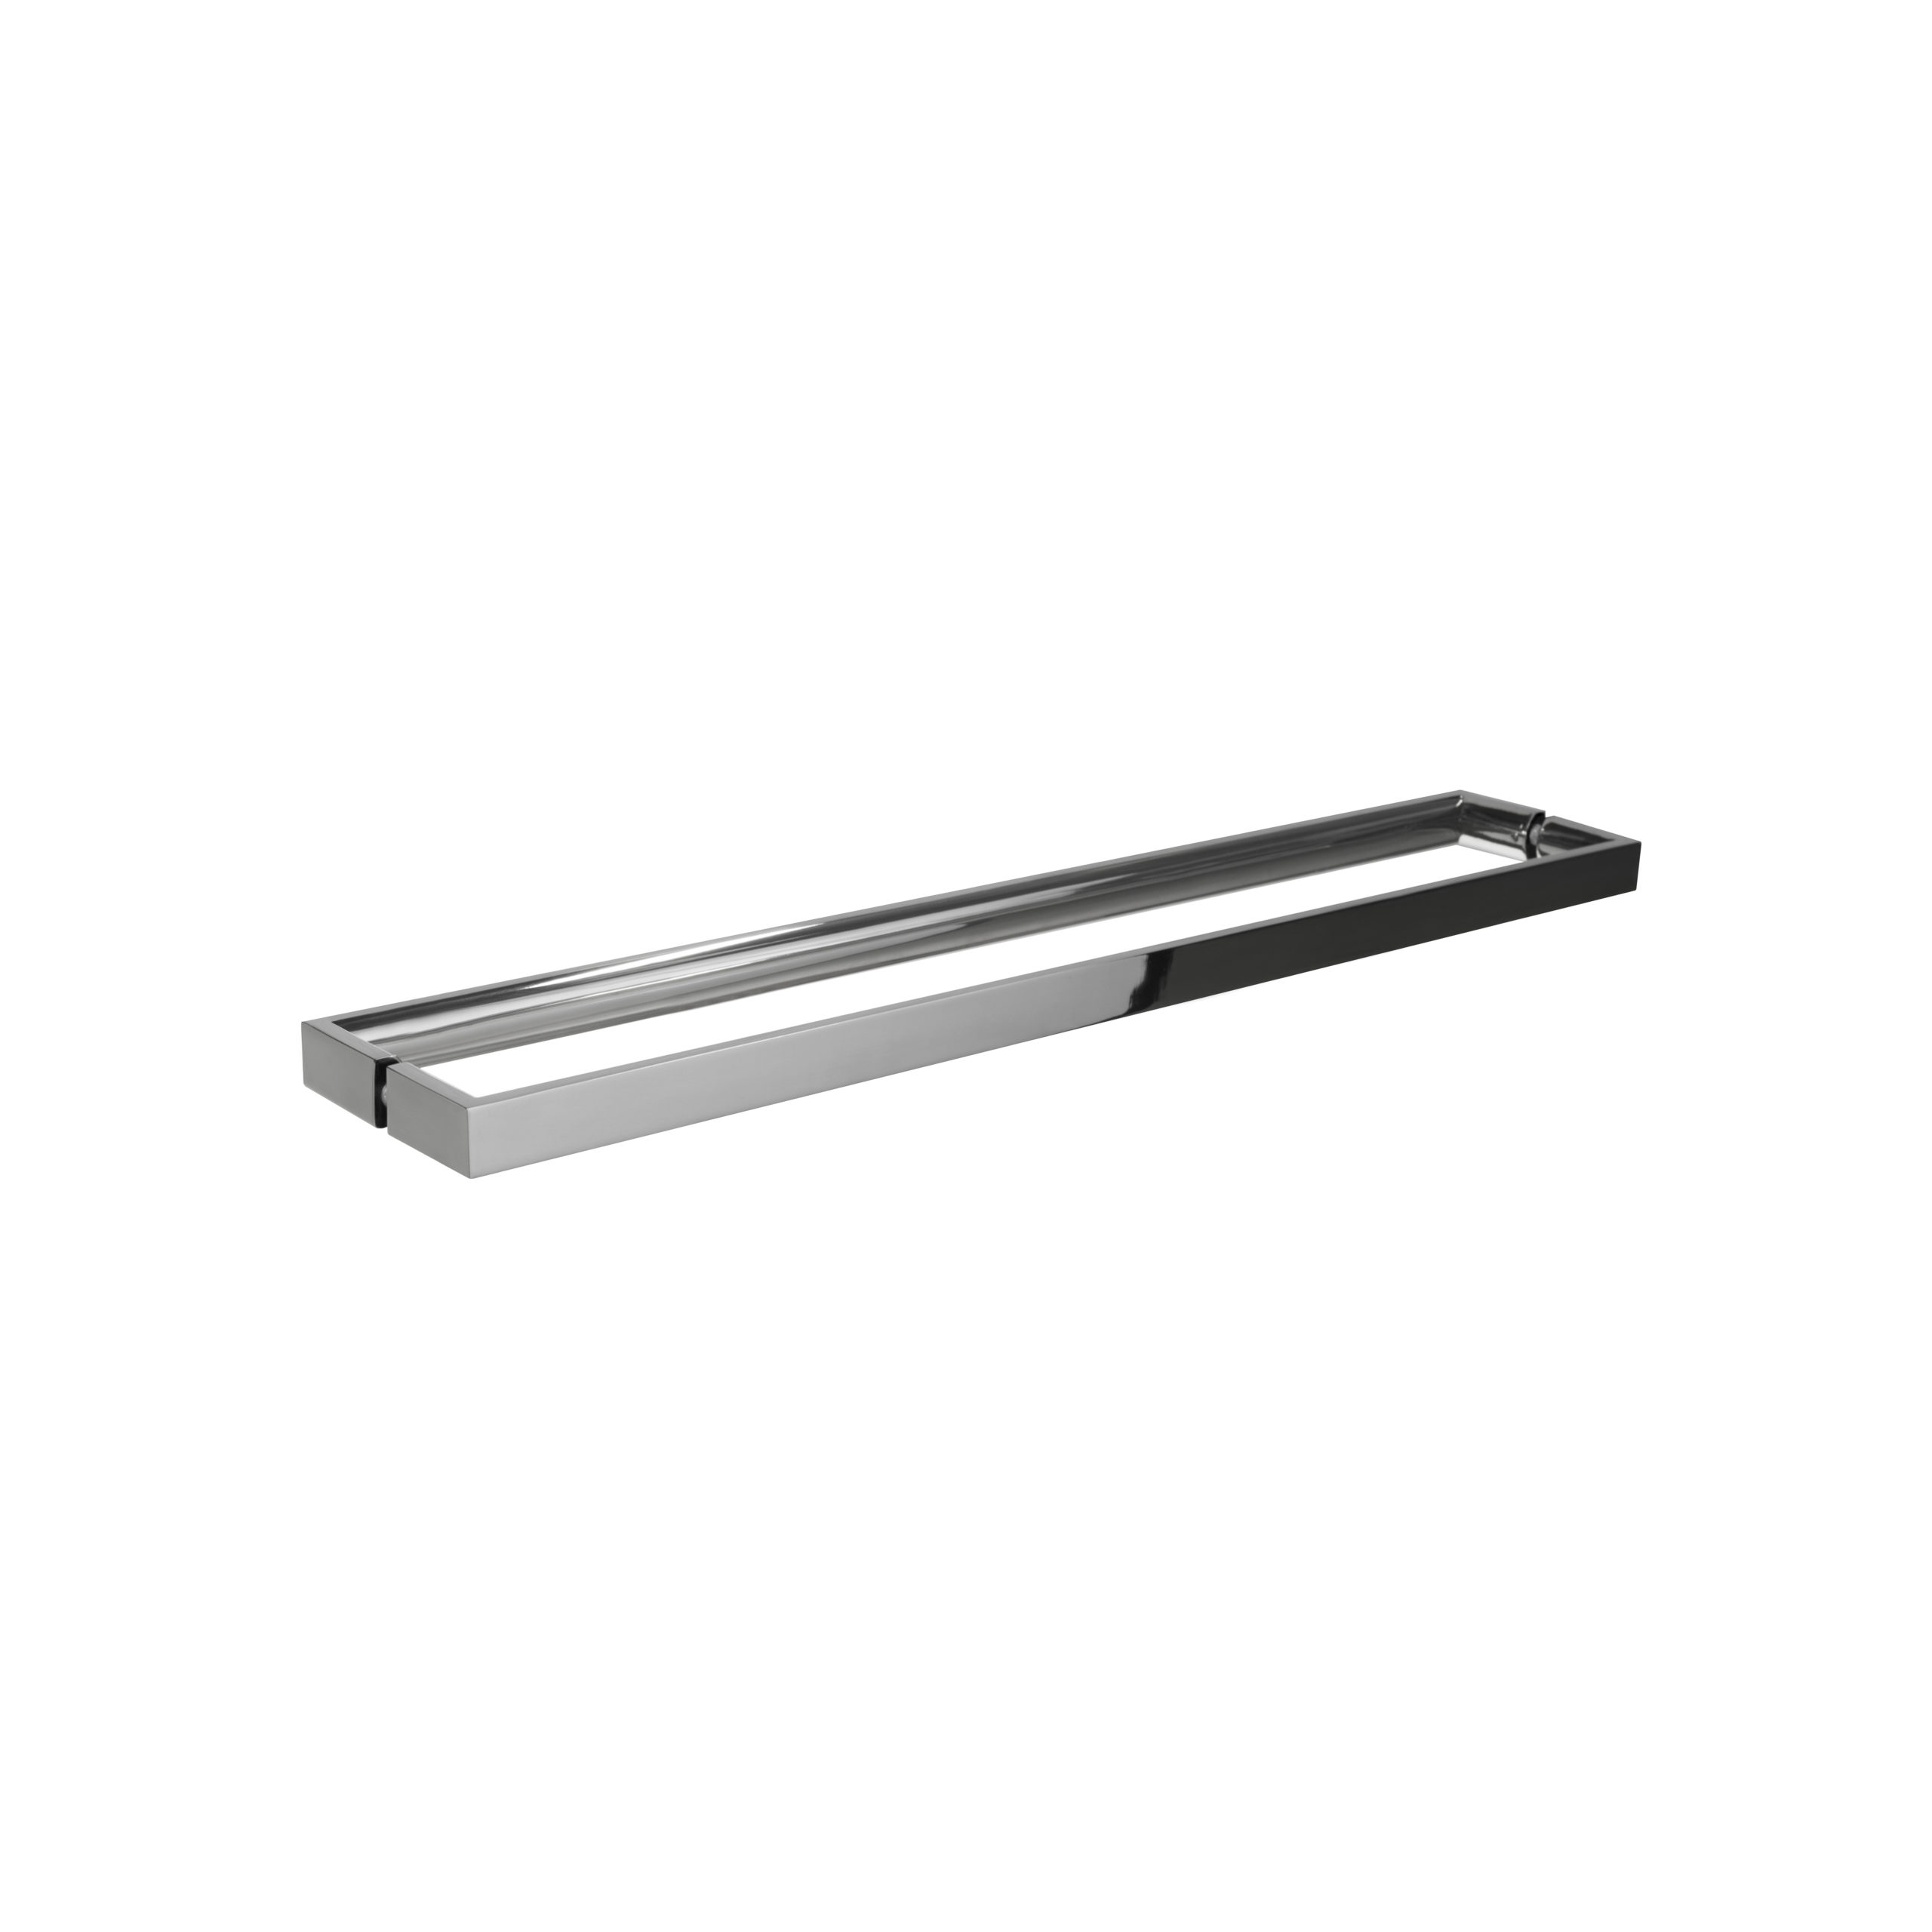 Polished stainless steel modern door handles - towel bar - back to back - product featured image - 24 inch length - product SKU II 502-3 PSS